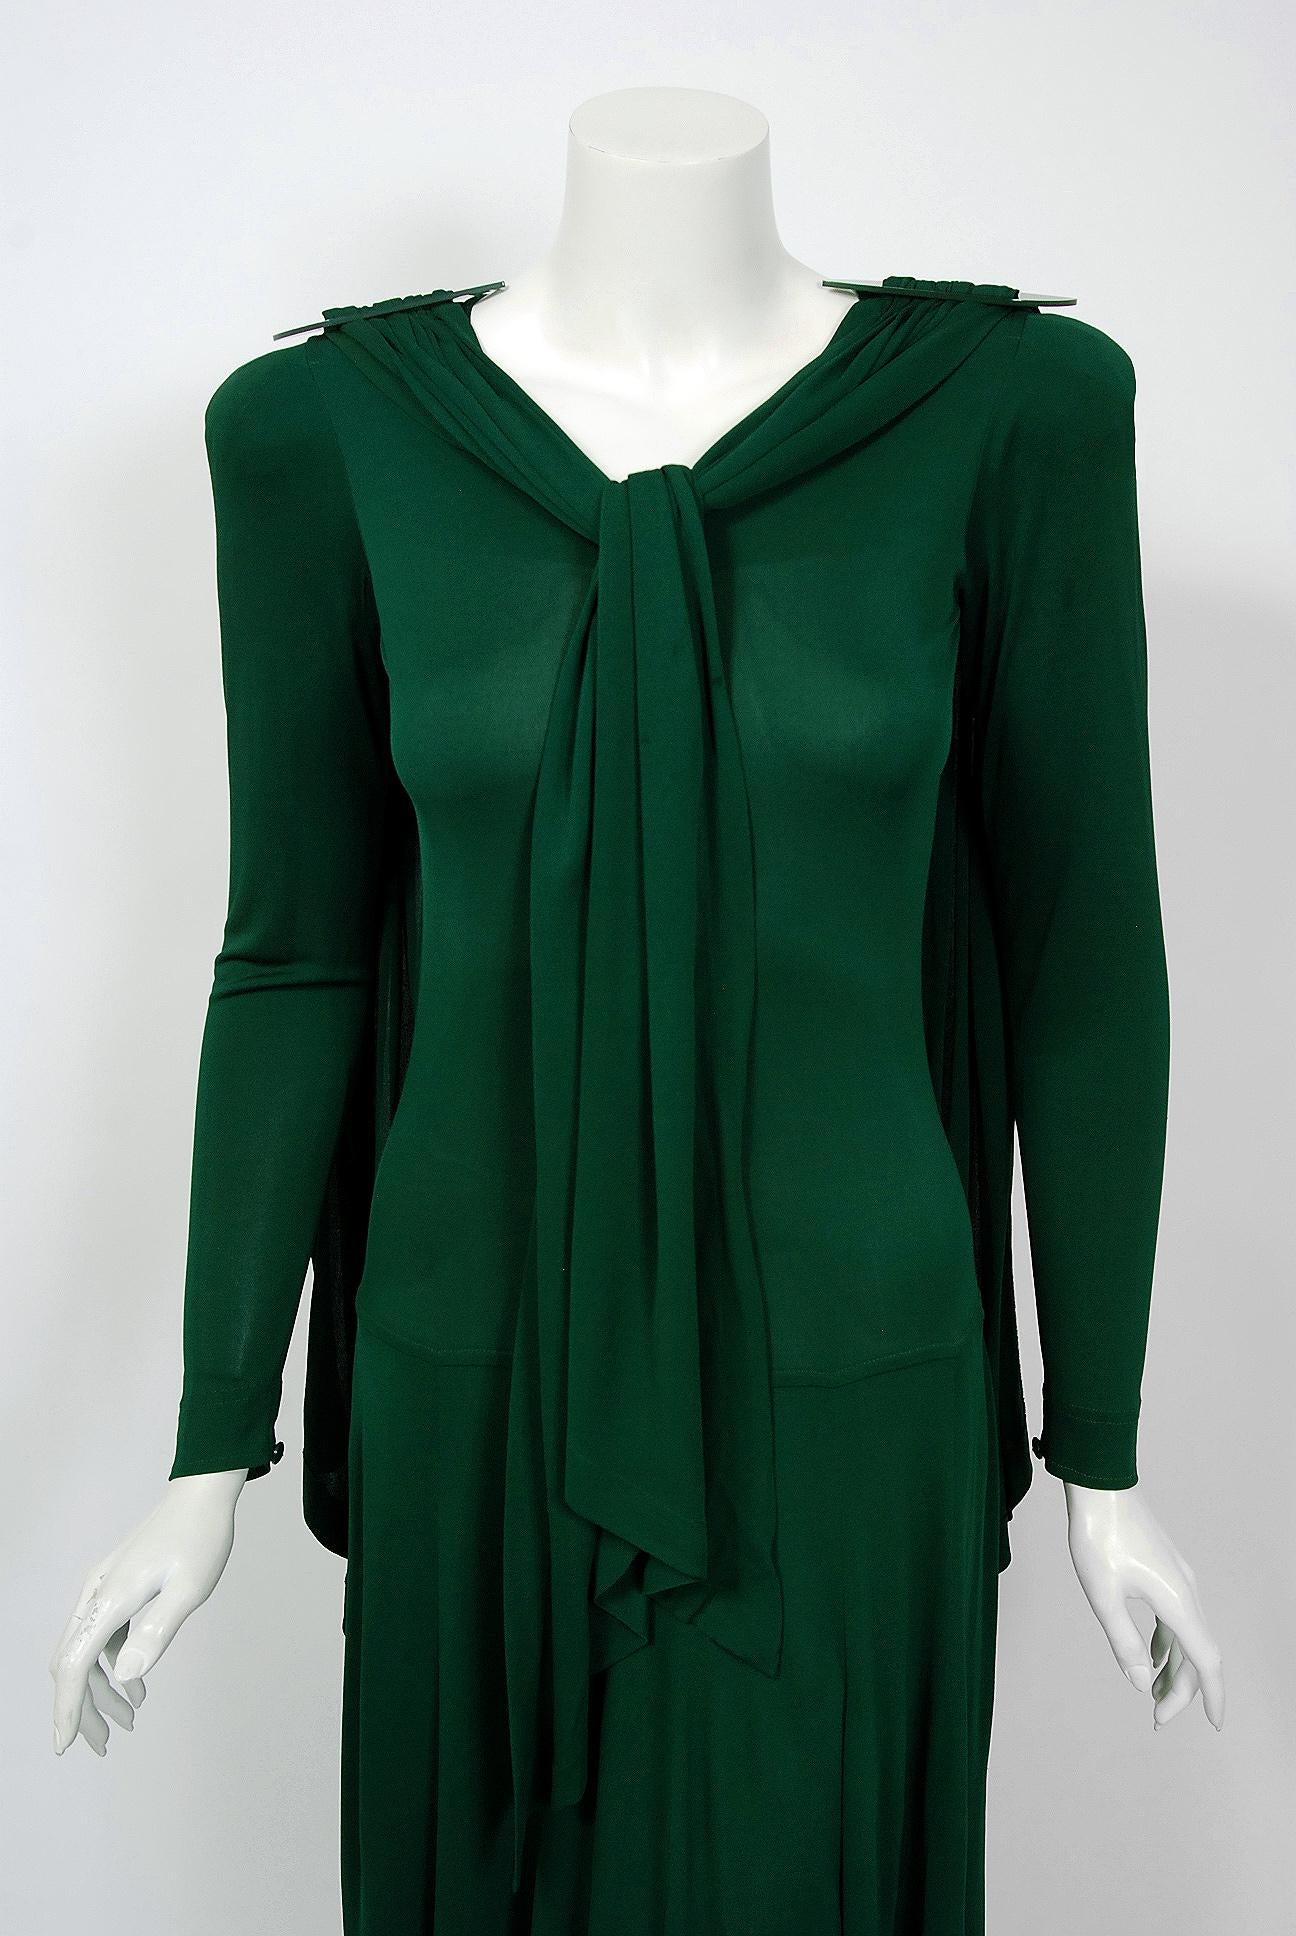 A gorgeous 1975 Jean Muir designer rayon-jersey maxi dress in the prettiest forest-green color. The self-taught Muir made her name in the 1960's, creating a reputation for exquisitely tailored, timeless, feminine clothing. Muir is 'designer’s